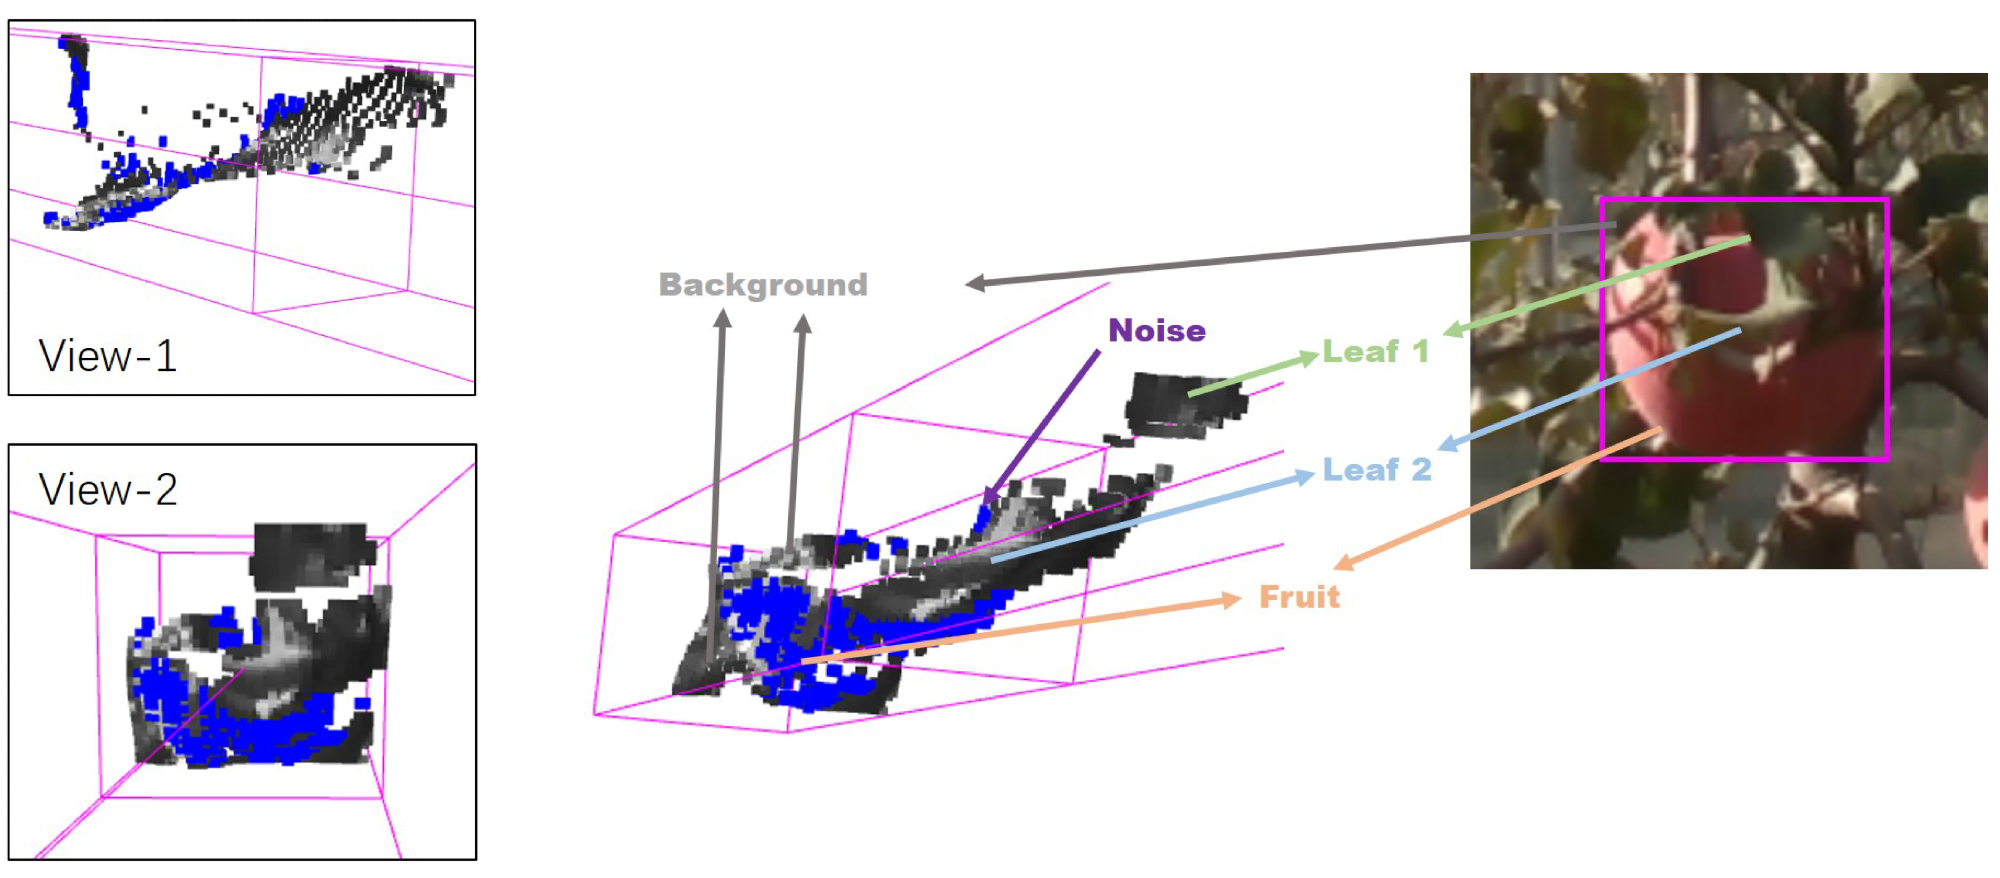 The point cloud in a frustum of partially occluded fruits, including point clouds of fruits (in blue), leaves, the background, and noise. View 1 and View 2 are two different angles of view of the point cloud: View 1 (left front); View 2 (front).